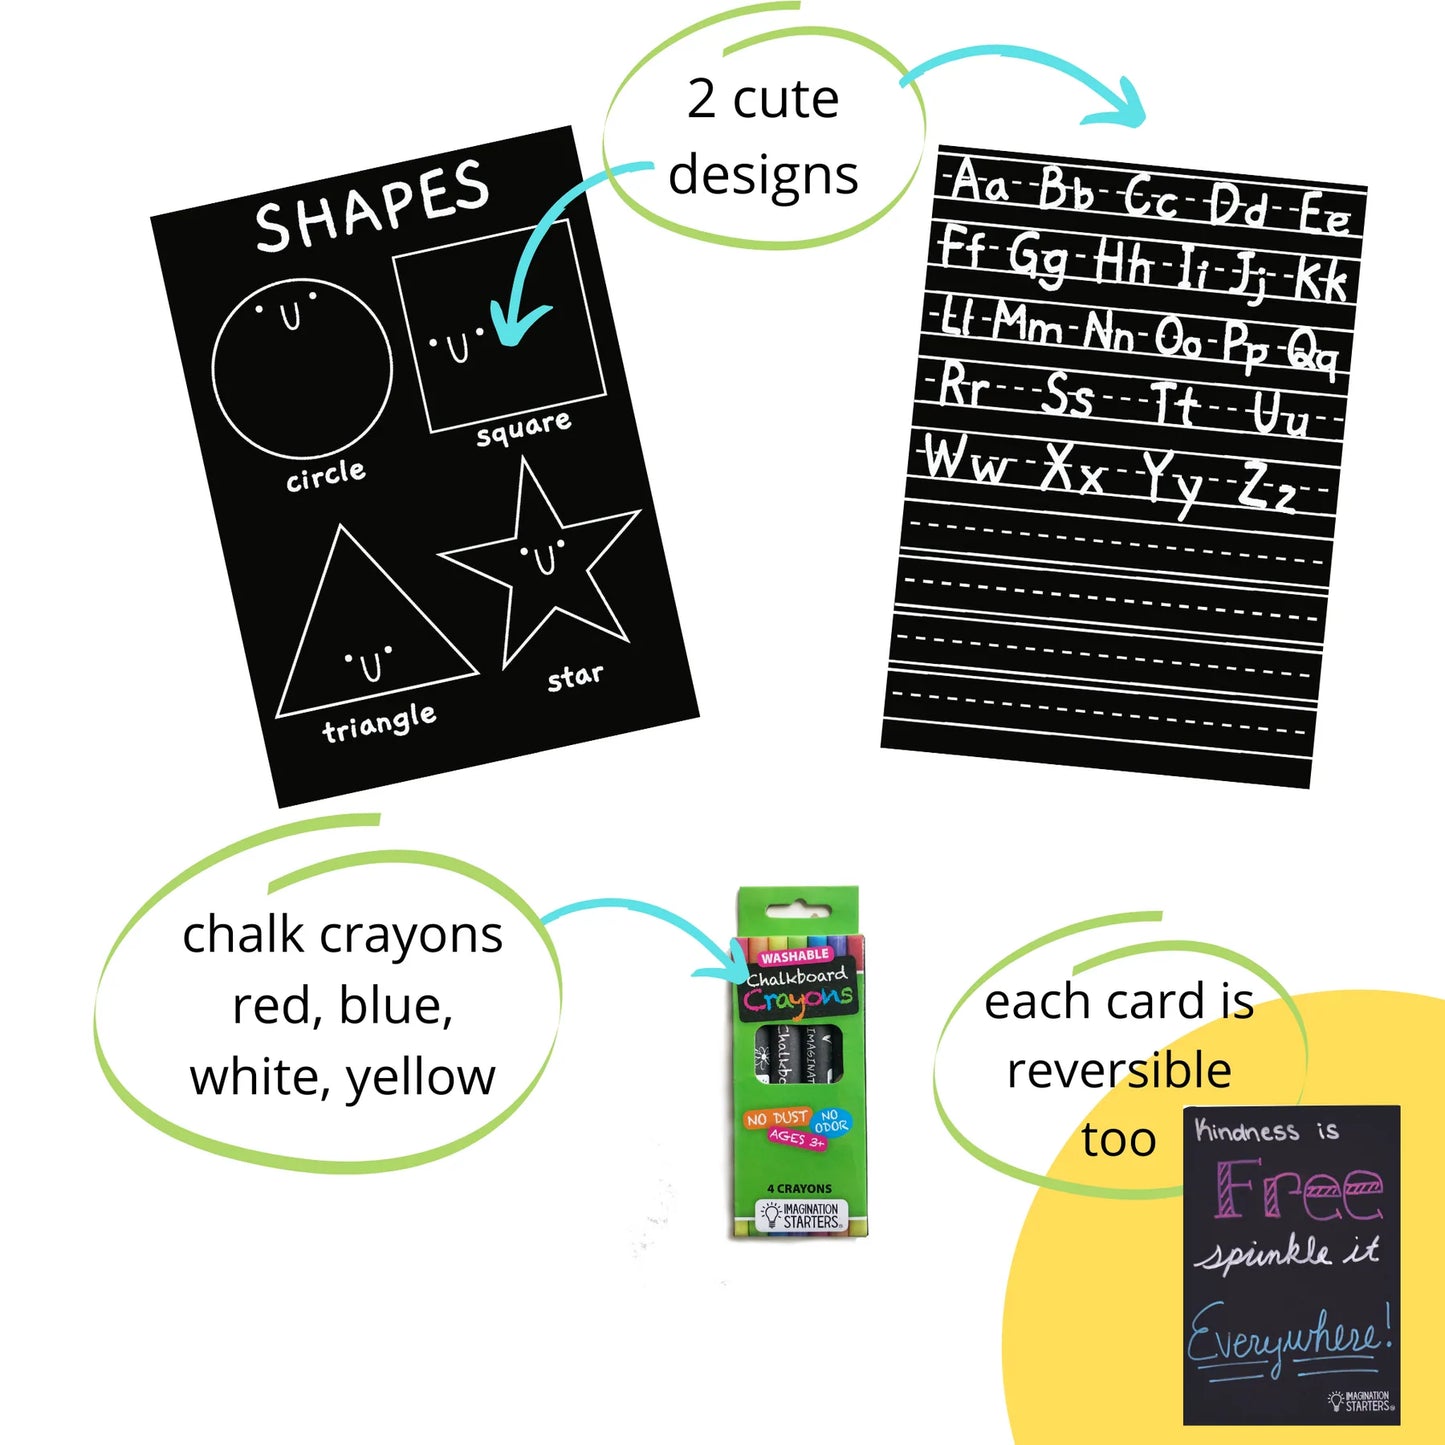 Letters & Shapes Chalkboard Card Activity Kit